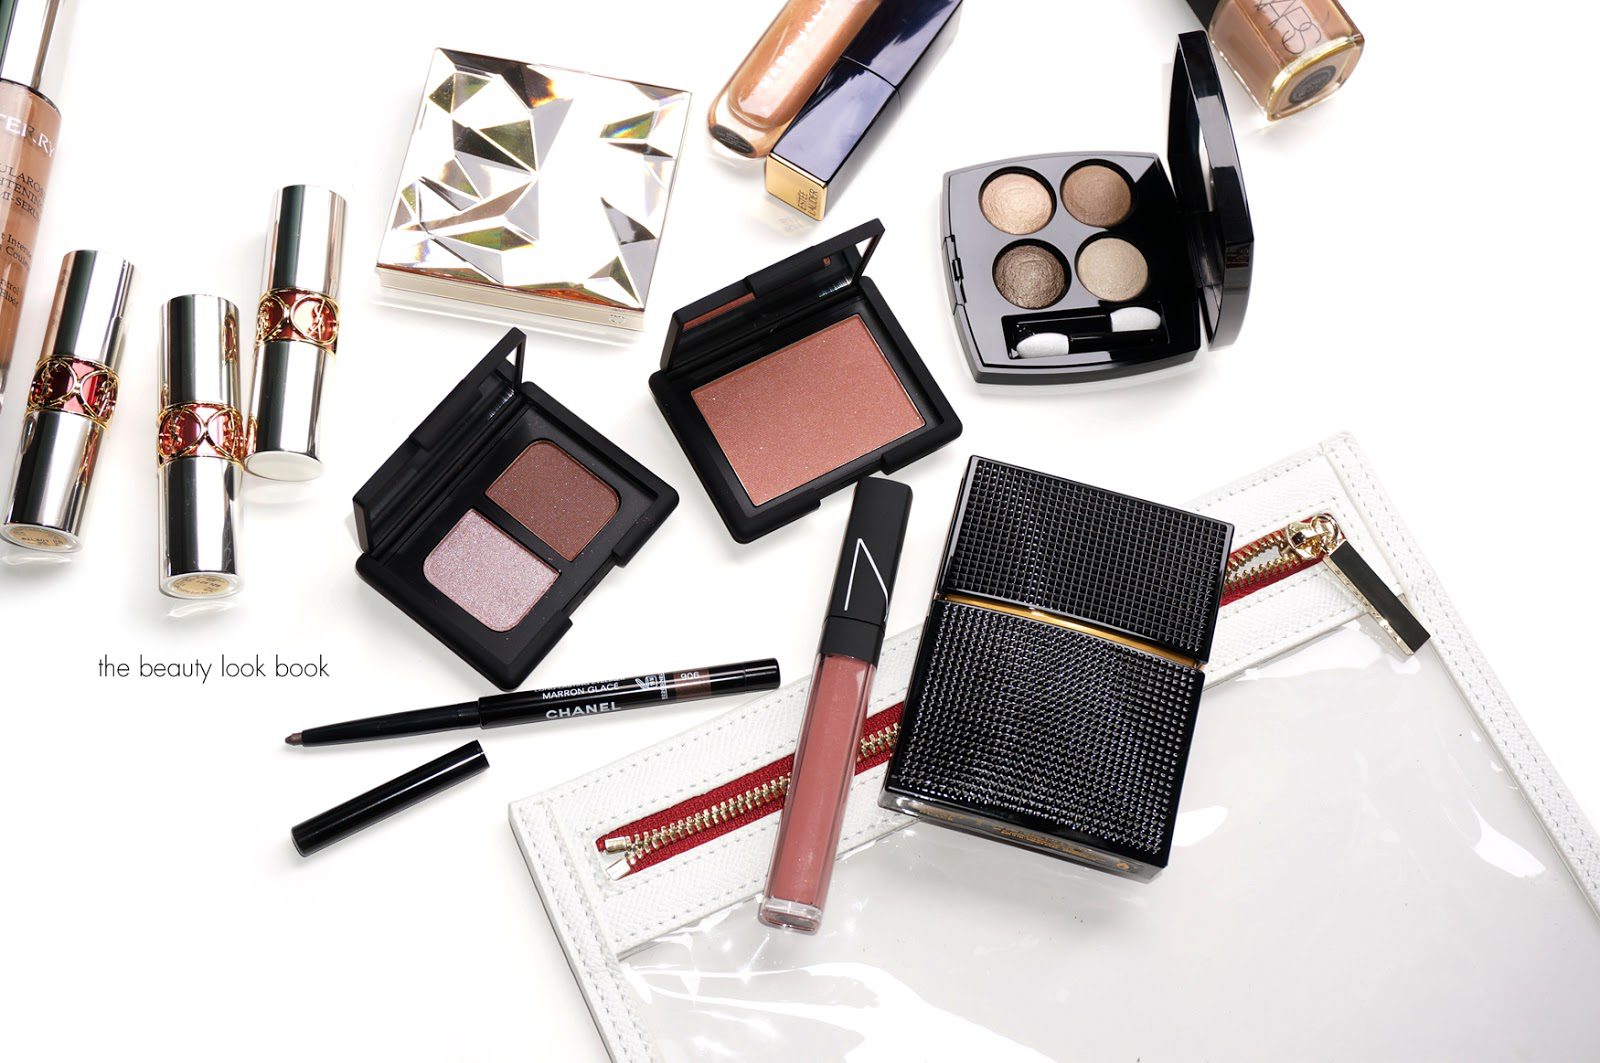 Cuyana Archives - The Beauty Look Book